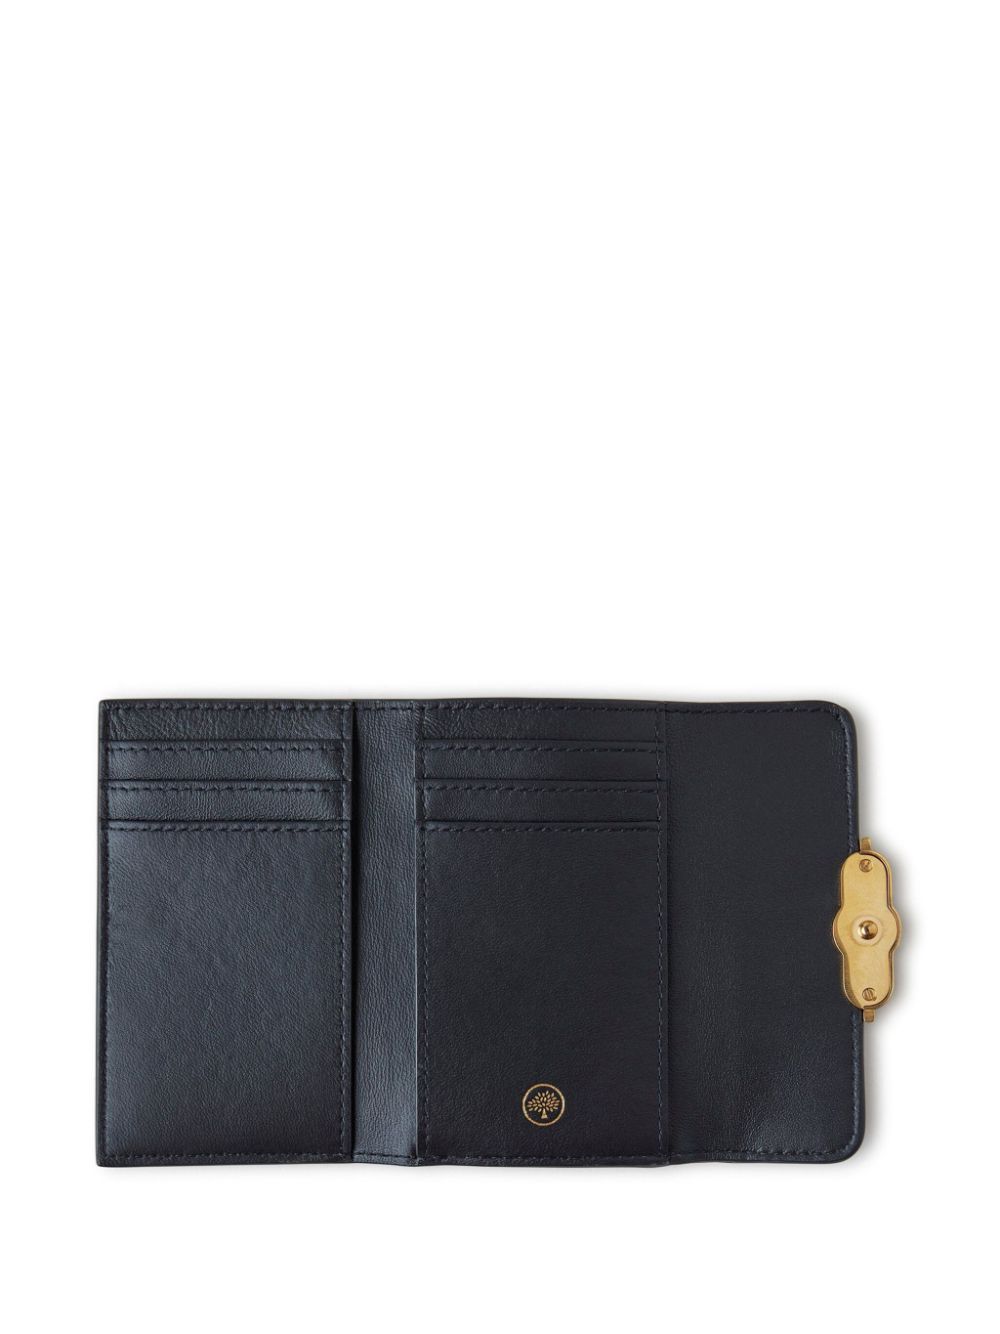 Shop Mulberry Pimlico Compact Leather Wallet In Black